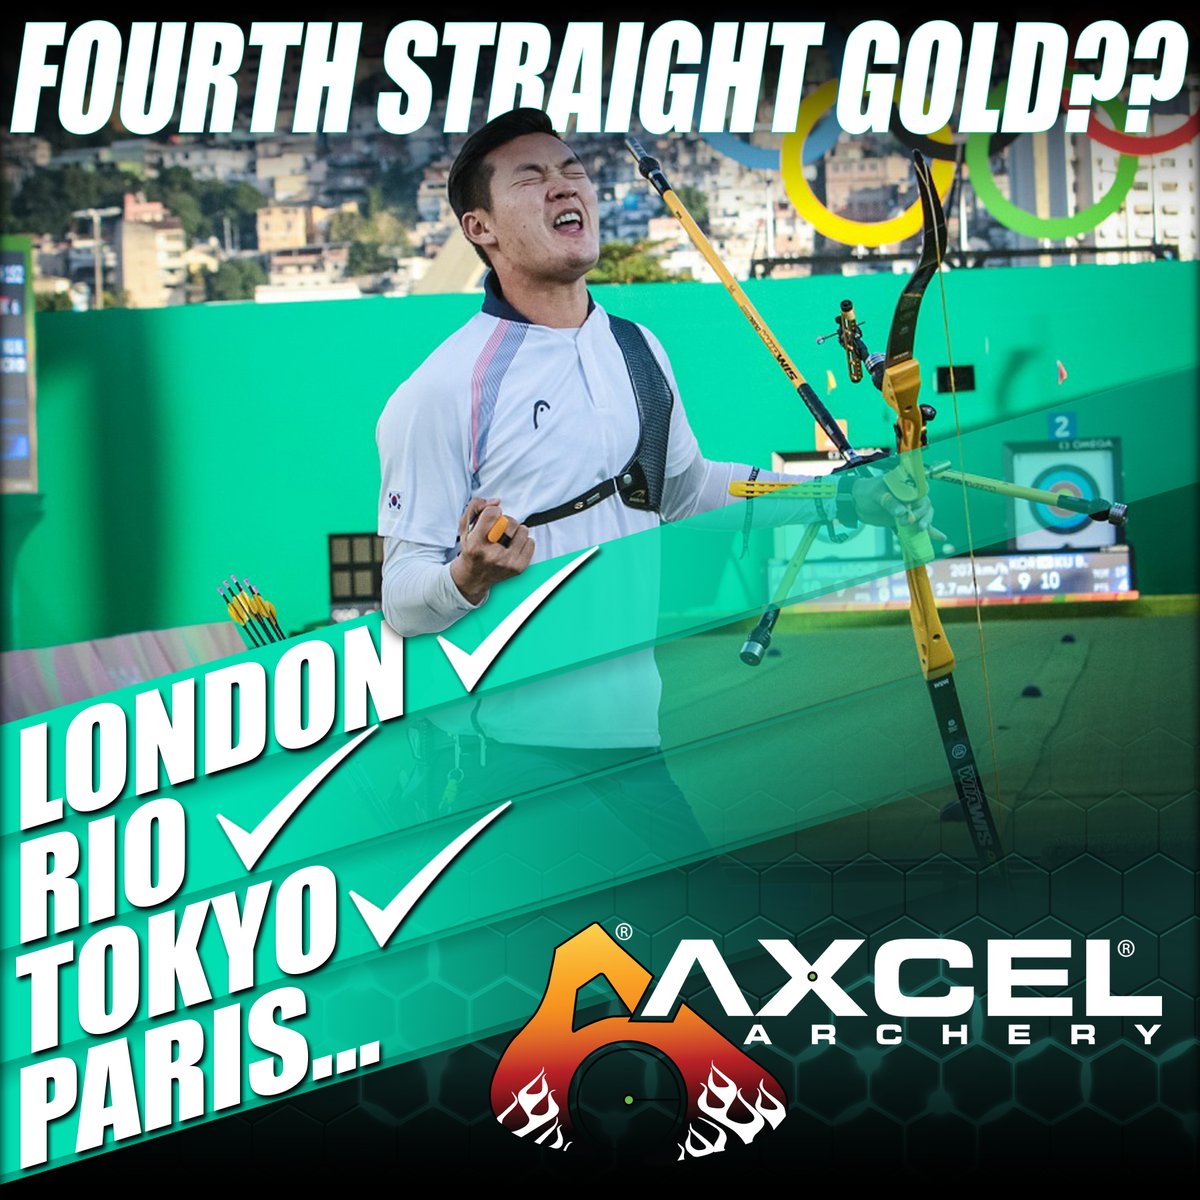 AXCEL #TopTierTeam members took home the gold🥇 in London🇬🇧, Rio🇧🇷, and Tokyo🇯🇵 all three in a row! Do you think it is going to be a fourth straight gold medal? Will we add another in Paris🇫🇷 this year? - #RealNumber1 #LeadingTechnology #ProvenResults #WeMakeArcheryBetter